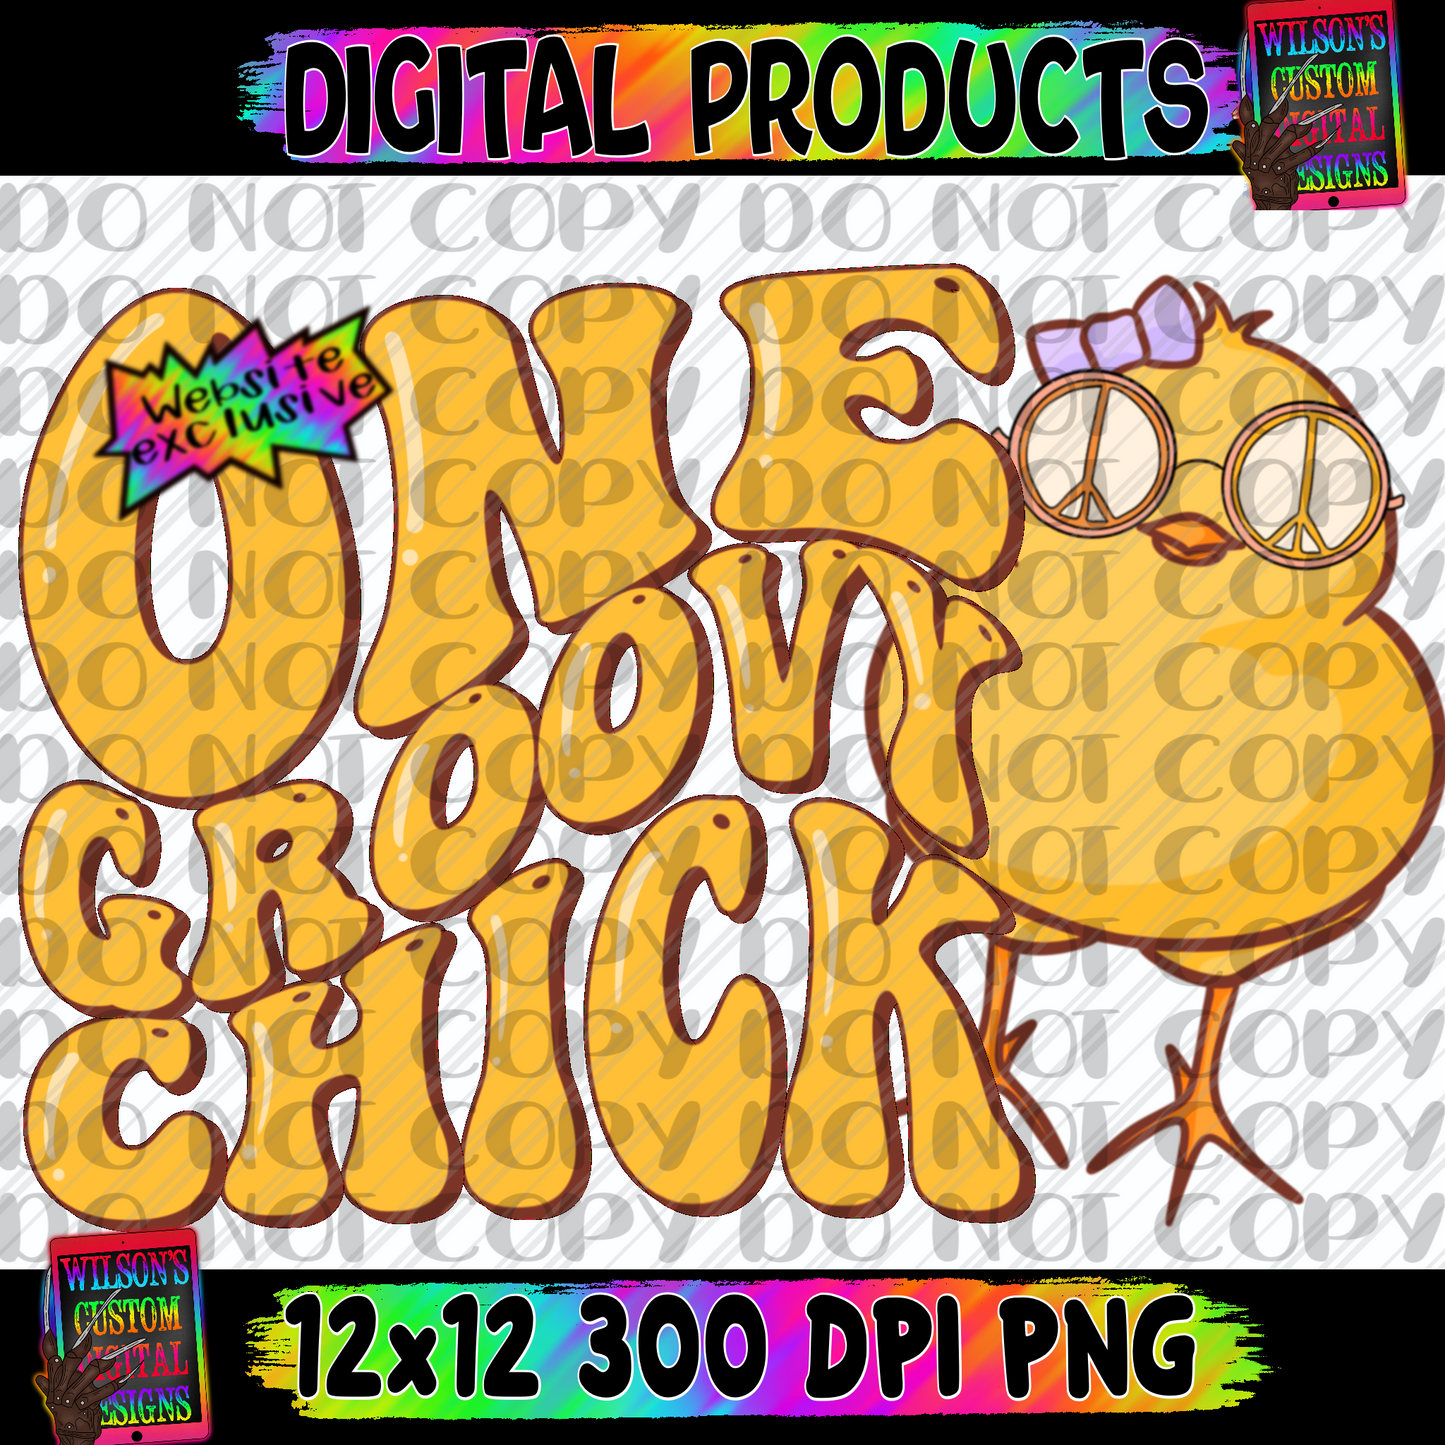 One groovy chick